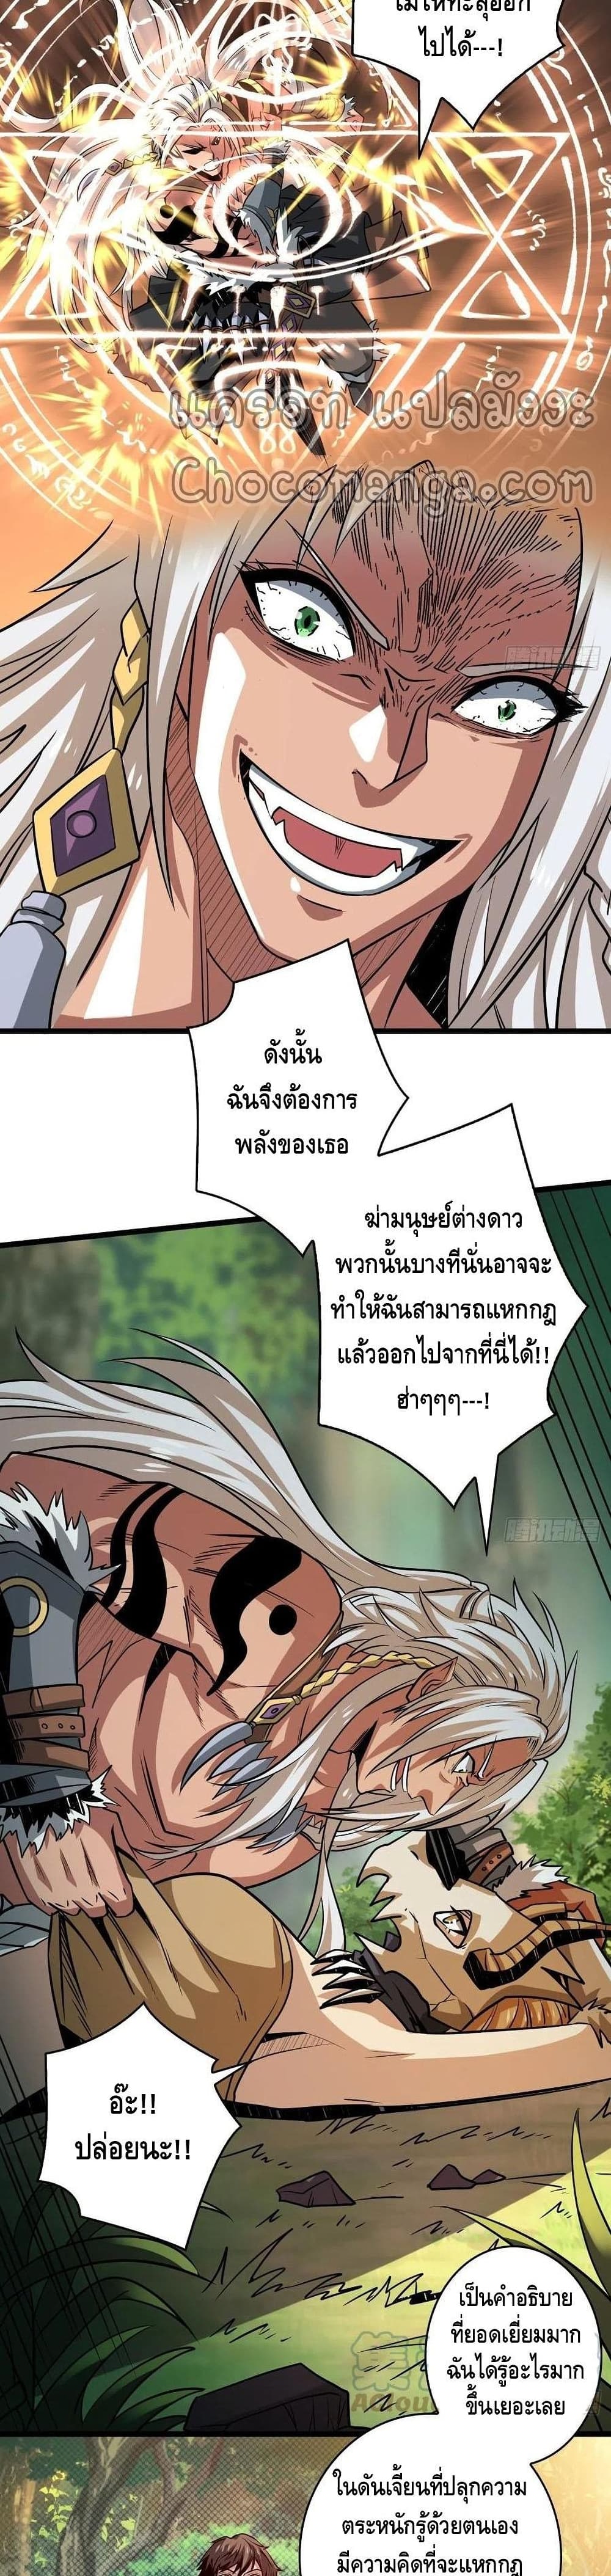 King Account at the Start เธ•เธญเธเธ—เธตเน 101 (19)